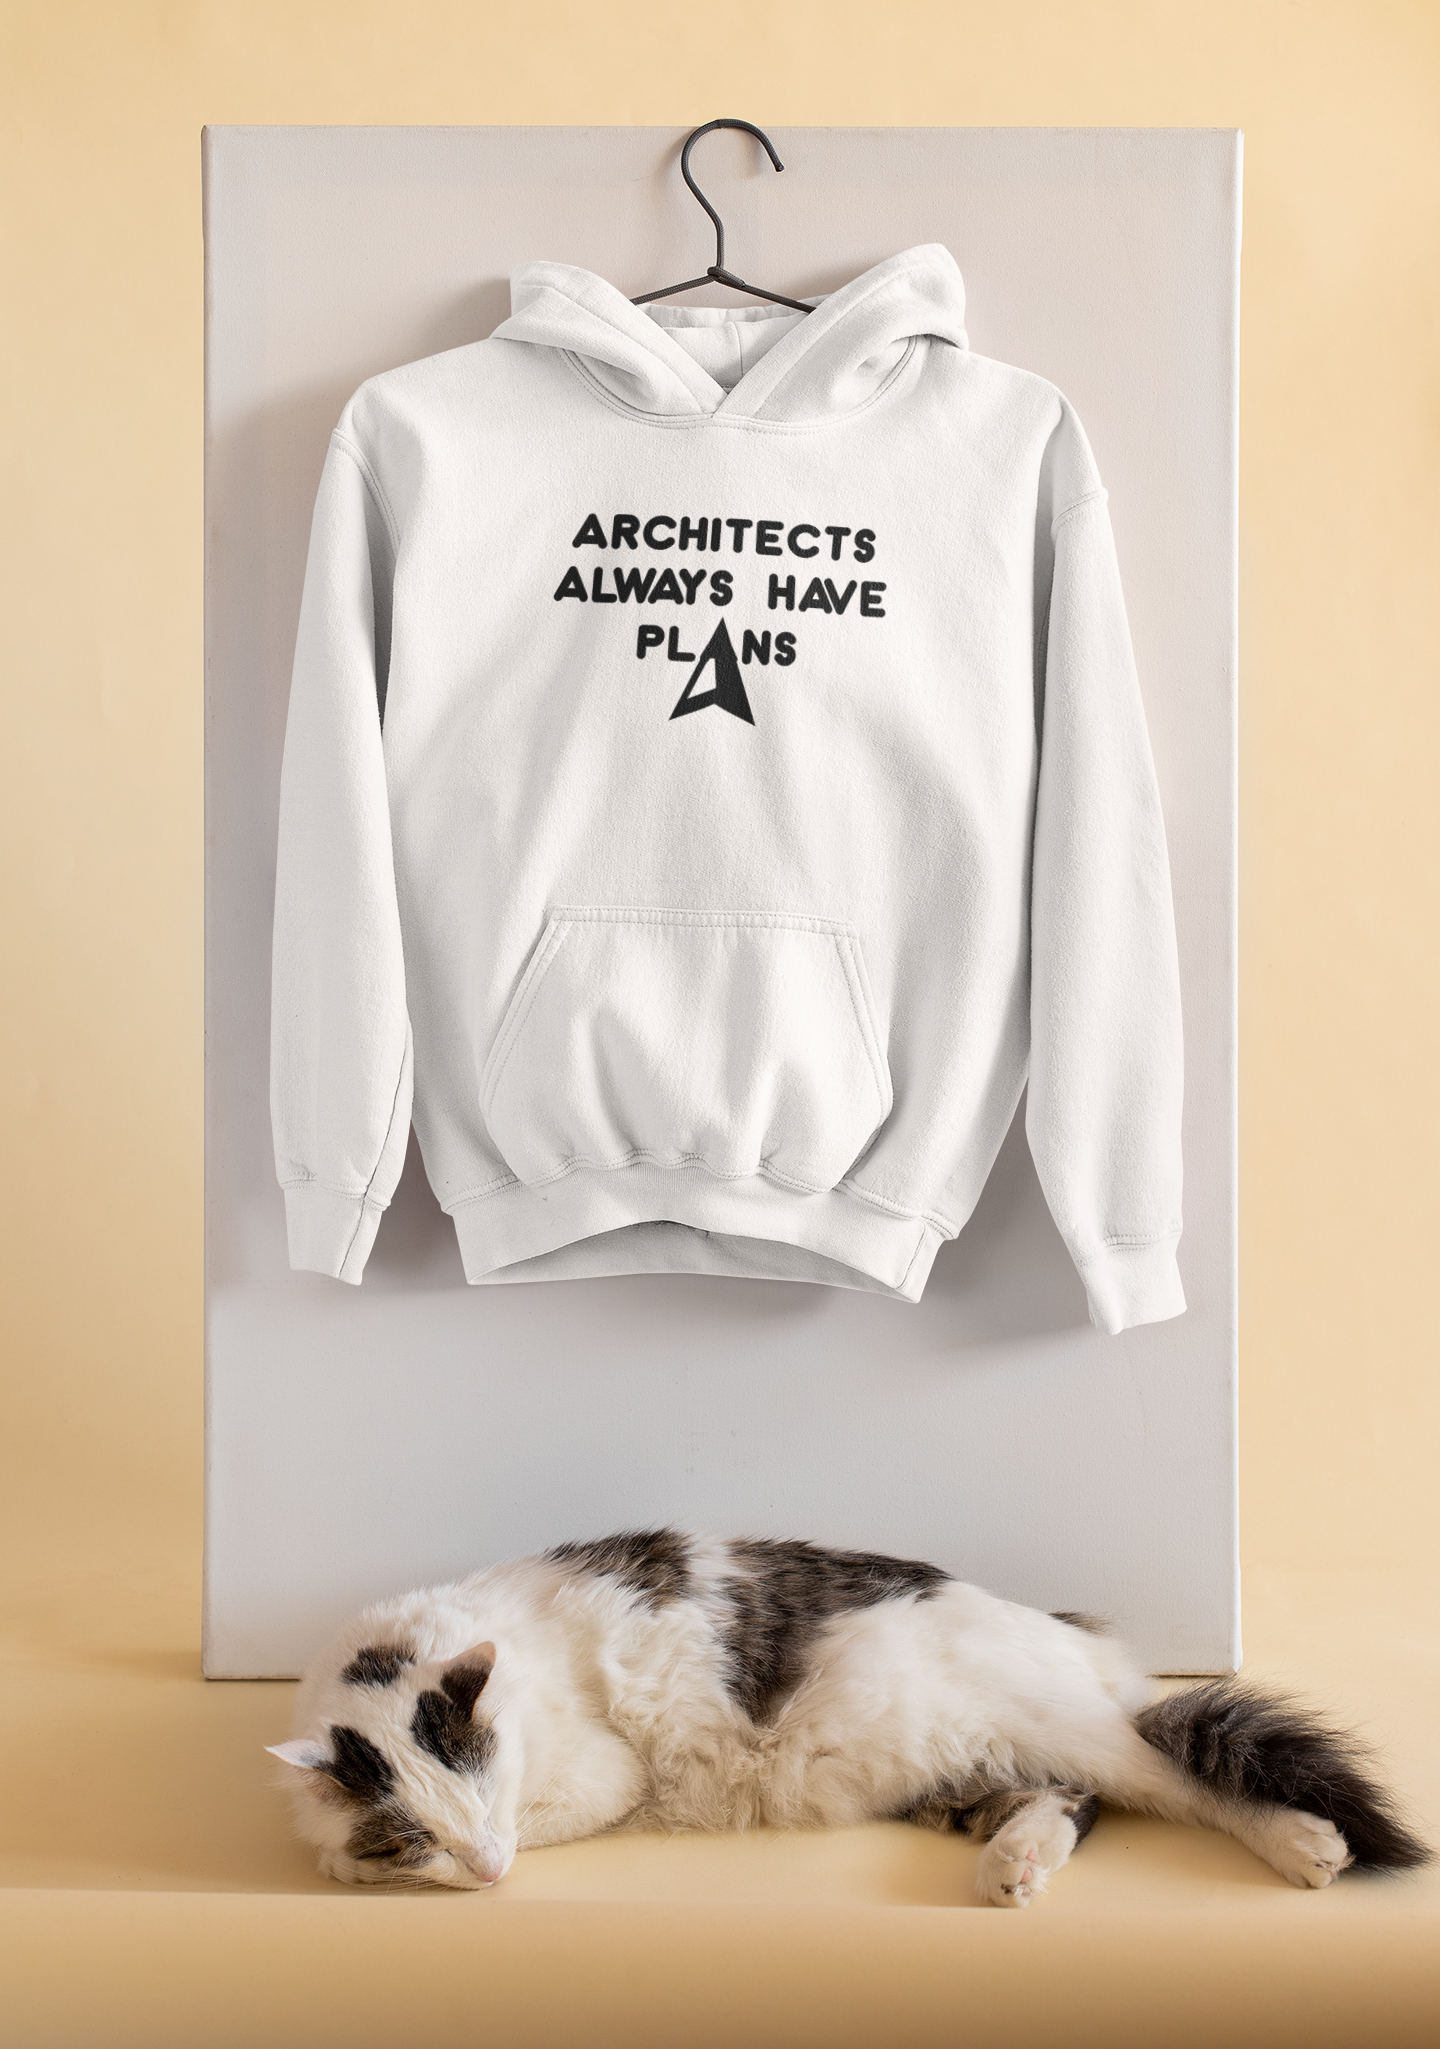 Architecture Always Have Plans Architect Profession Hoodies for Women-FunkyTeesClub